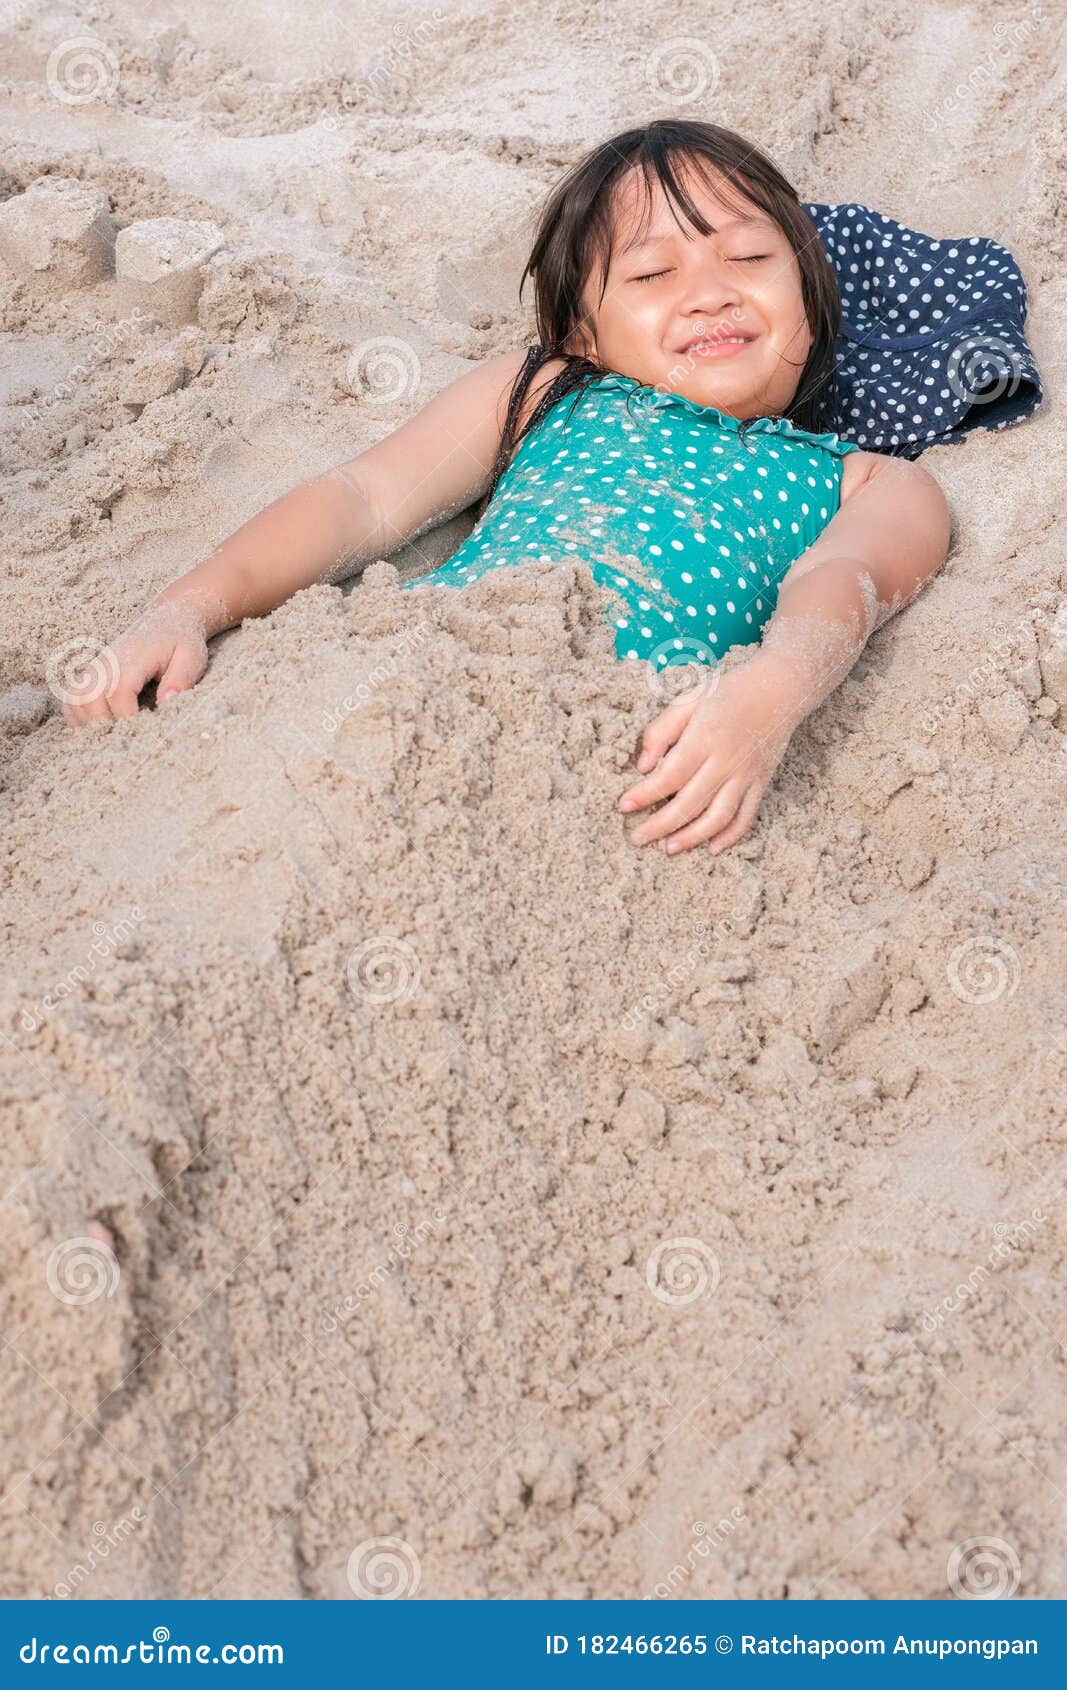 Asian Chinese Little Girl Playing Sand At Beach Stock Photo - Image of lifestyle, hobby: 143873618